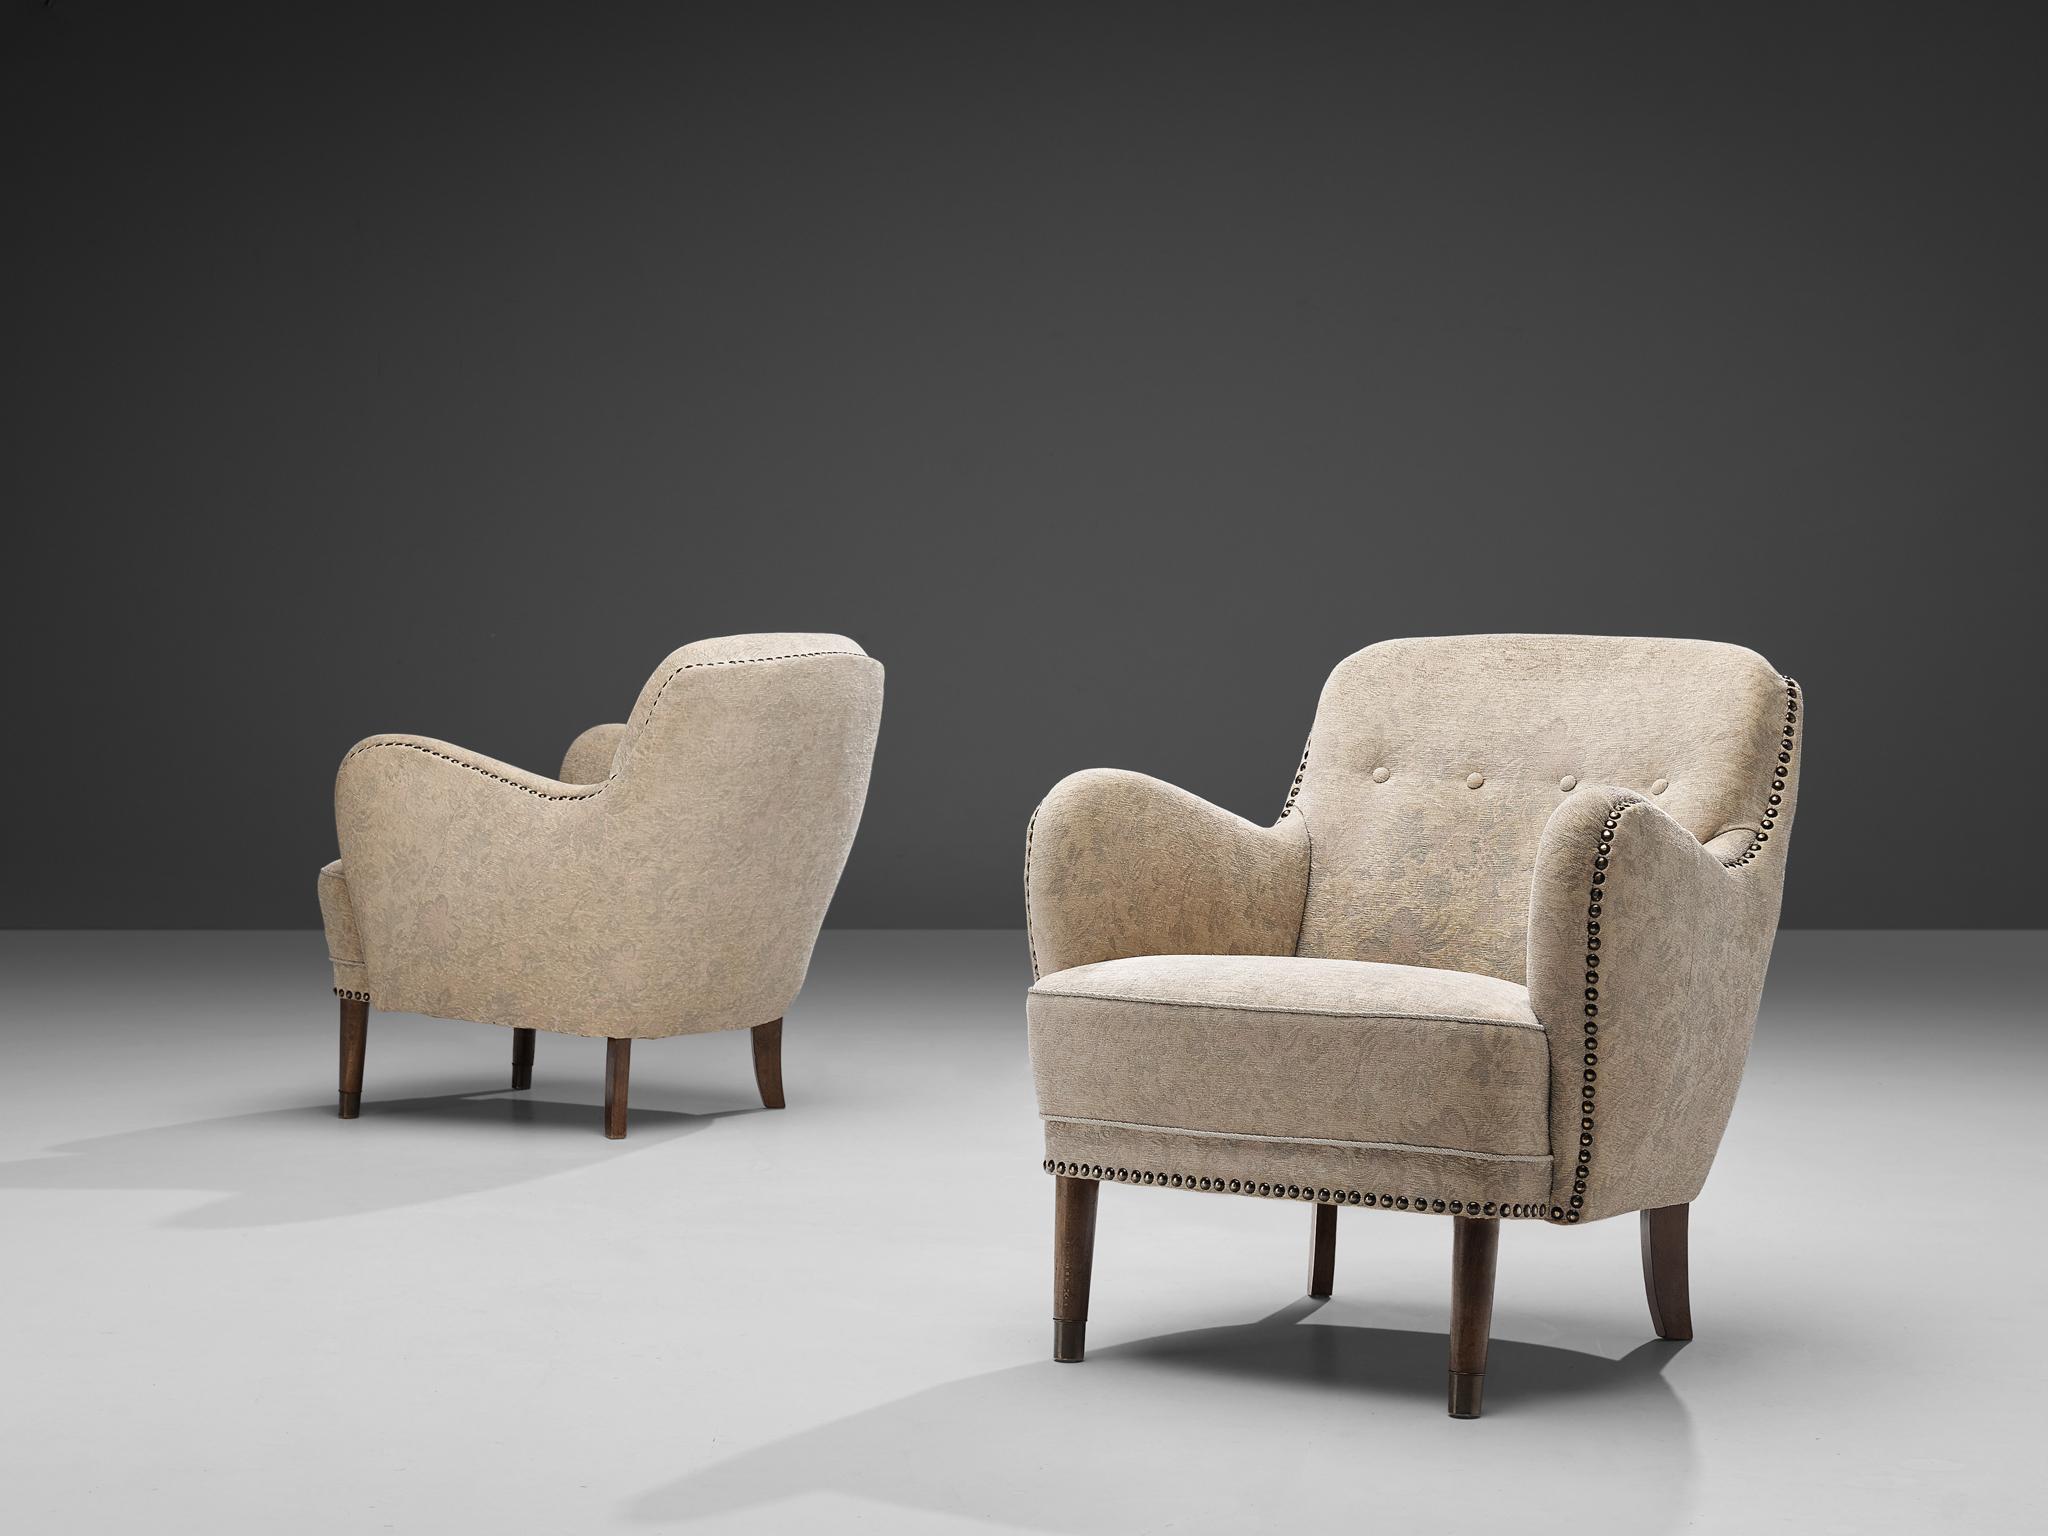 Art Deco lounge chairs, stained beech, fabric, brass nails, Denmark, 1940s

This pair of easy chairs features dynamic formed armrests pointing upwards. The backrest is slightly tilted backwards and decorated with tufted details. Beautiful lines of